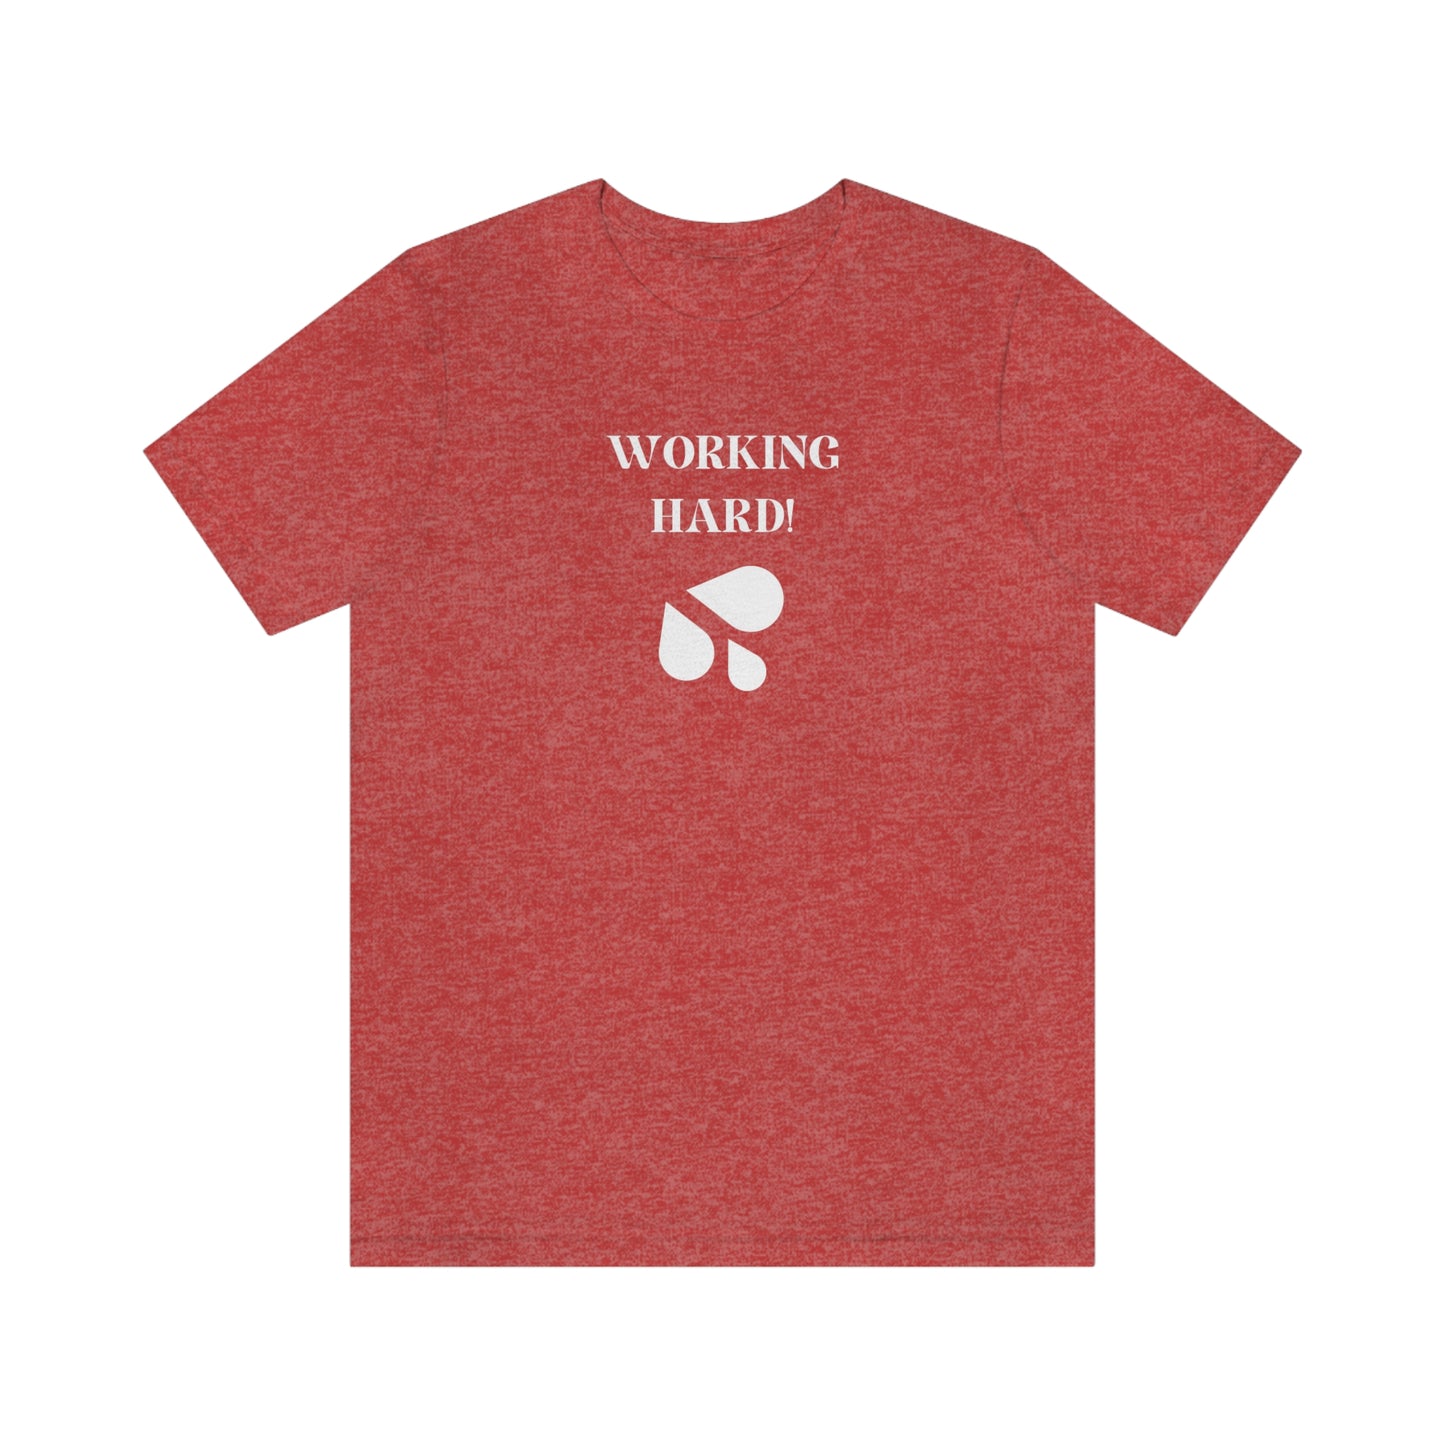 Working hard inspirational words t shirts, t shirts that encourage, t shirts gift for friends t shirts lauds hard work